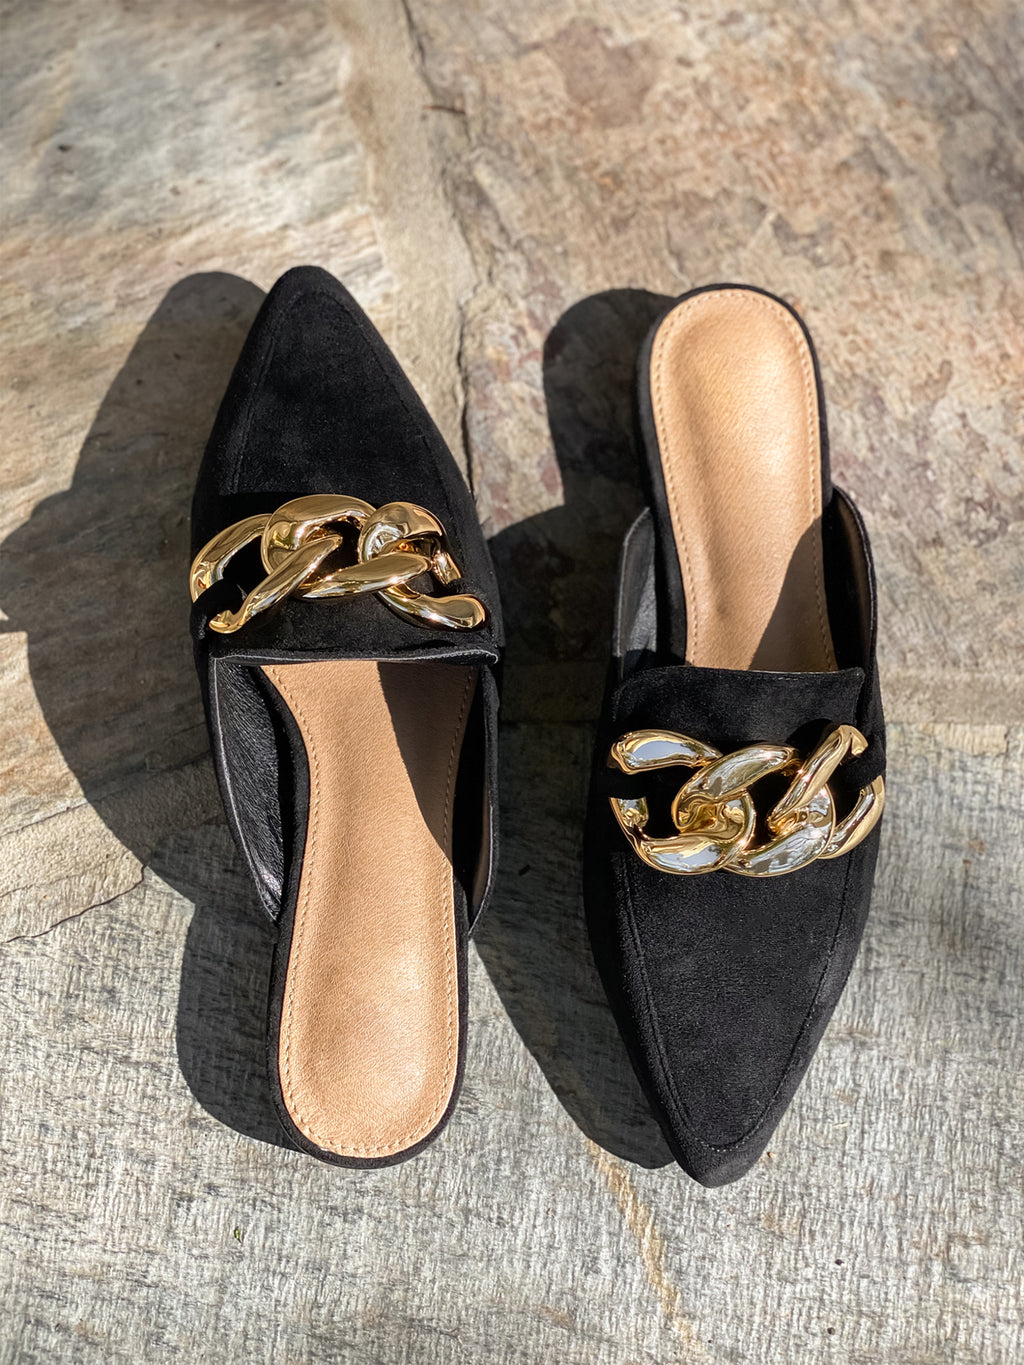 Gem Loafers in Black - Final Sale - Stitch And Feather